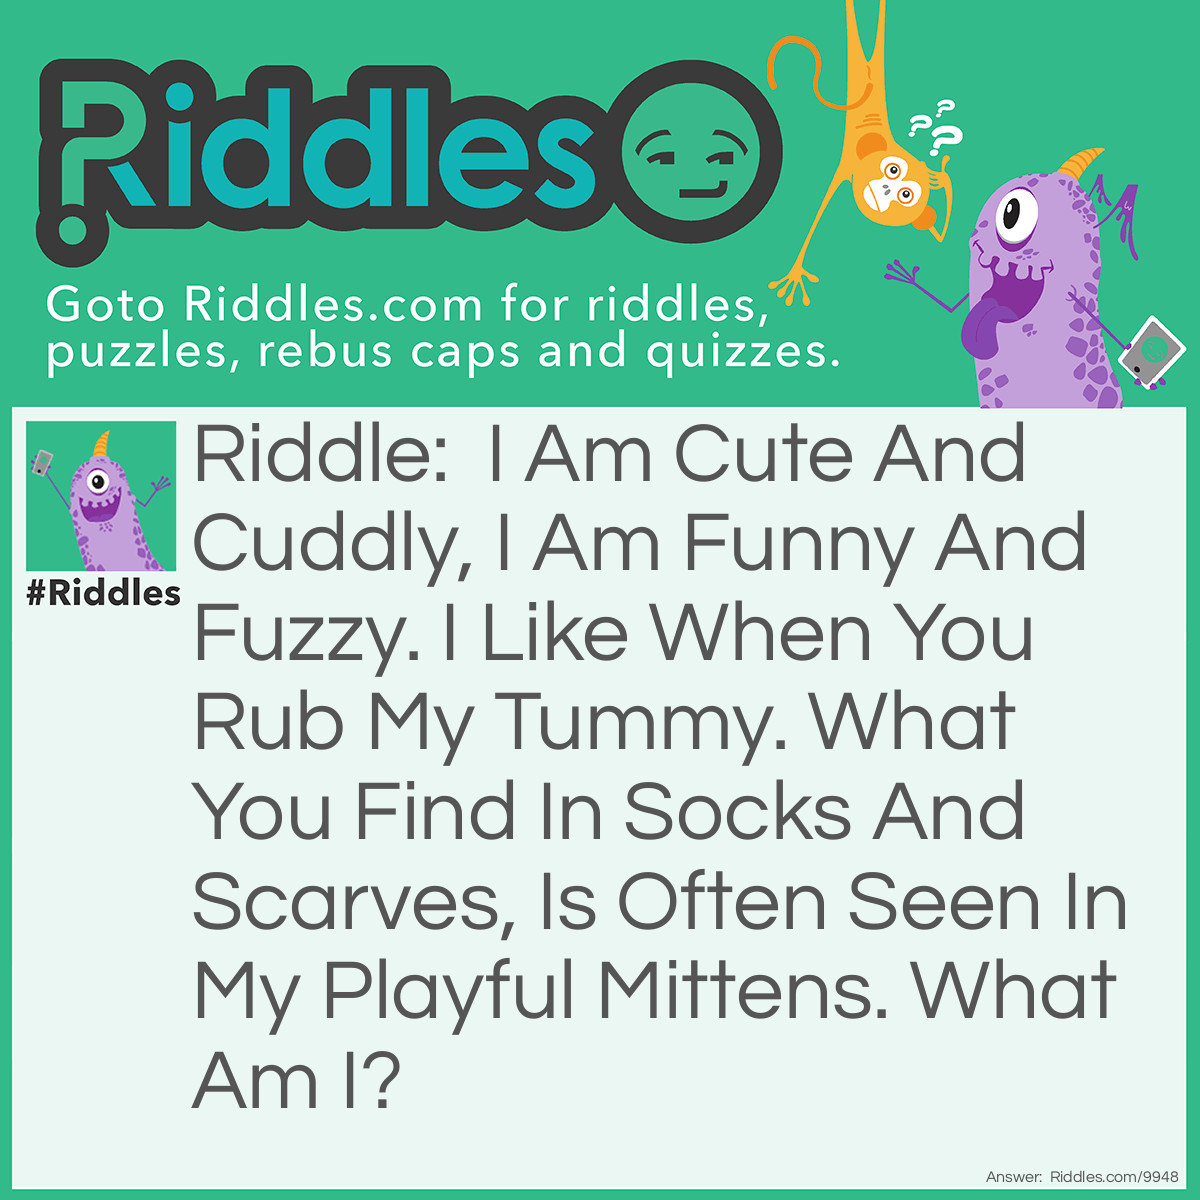 Riddle: I am cute and cuddly, I am funny and fuzzy. I like when you rub my tummy. What you find in socks and scarves, Is often seen in my playful mittens. What am I? Answer: I’m a kitten.